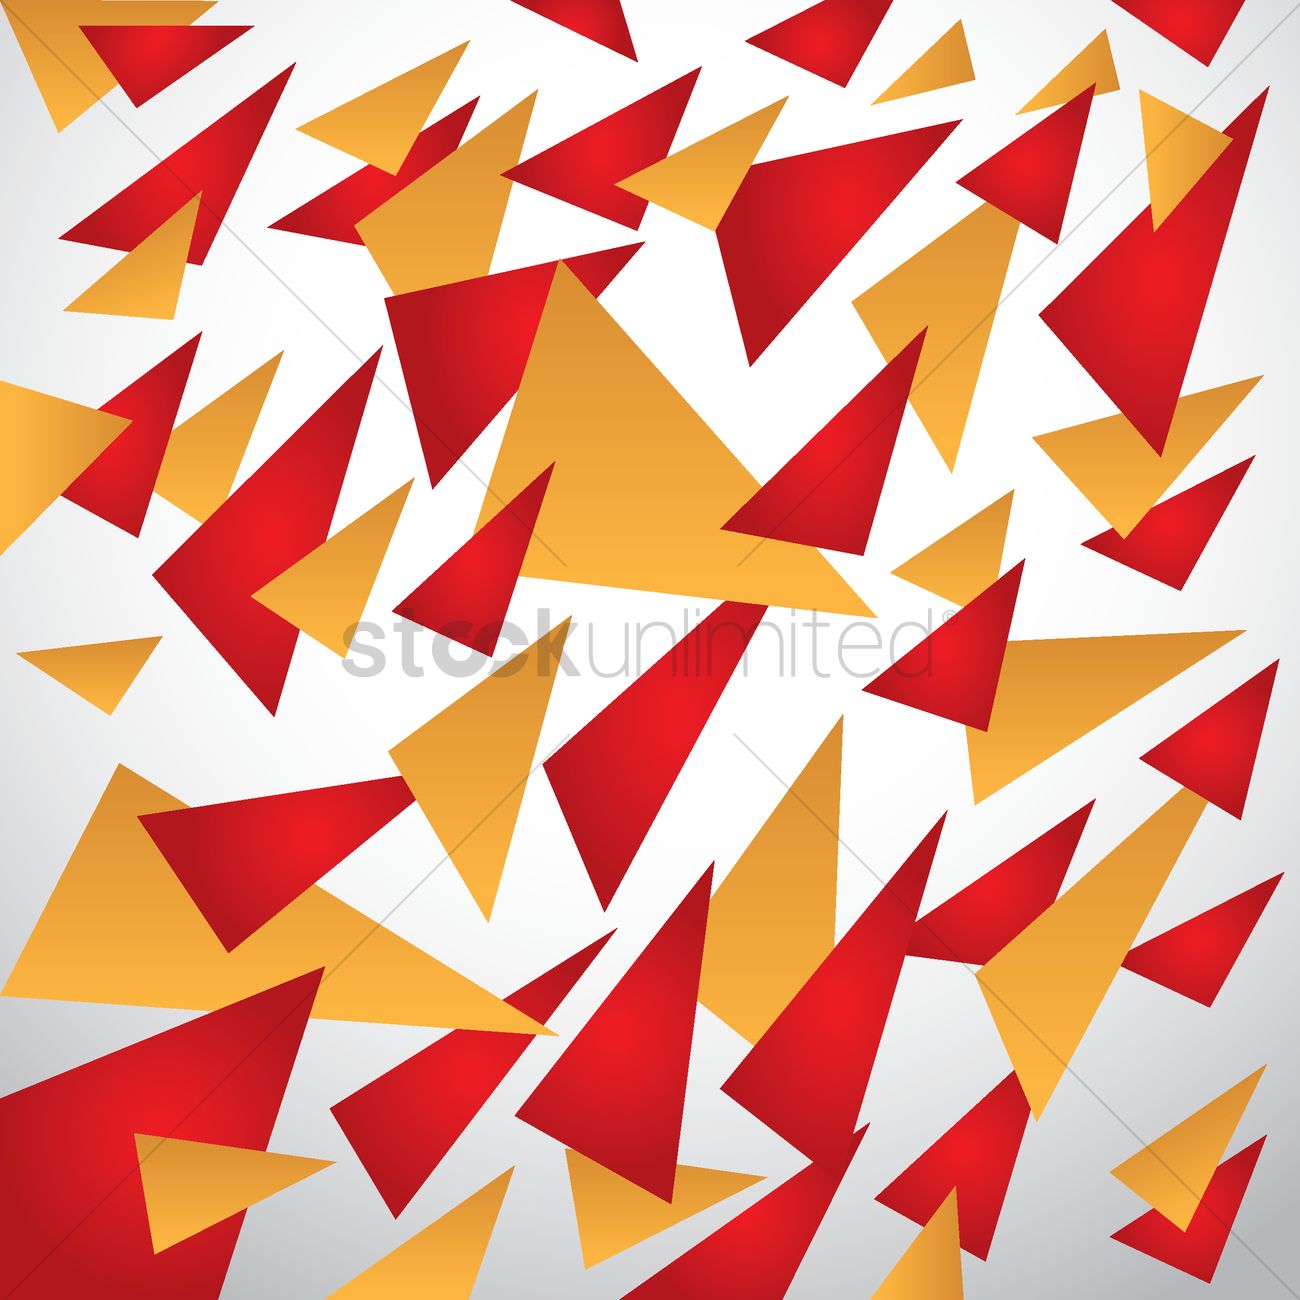 Scattered Triangle Background Vector Image Stockunlimited